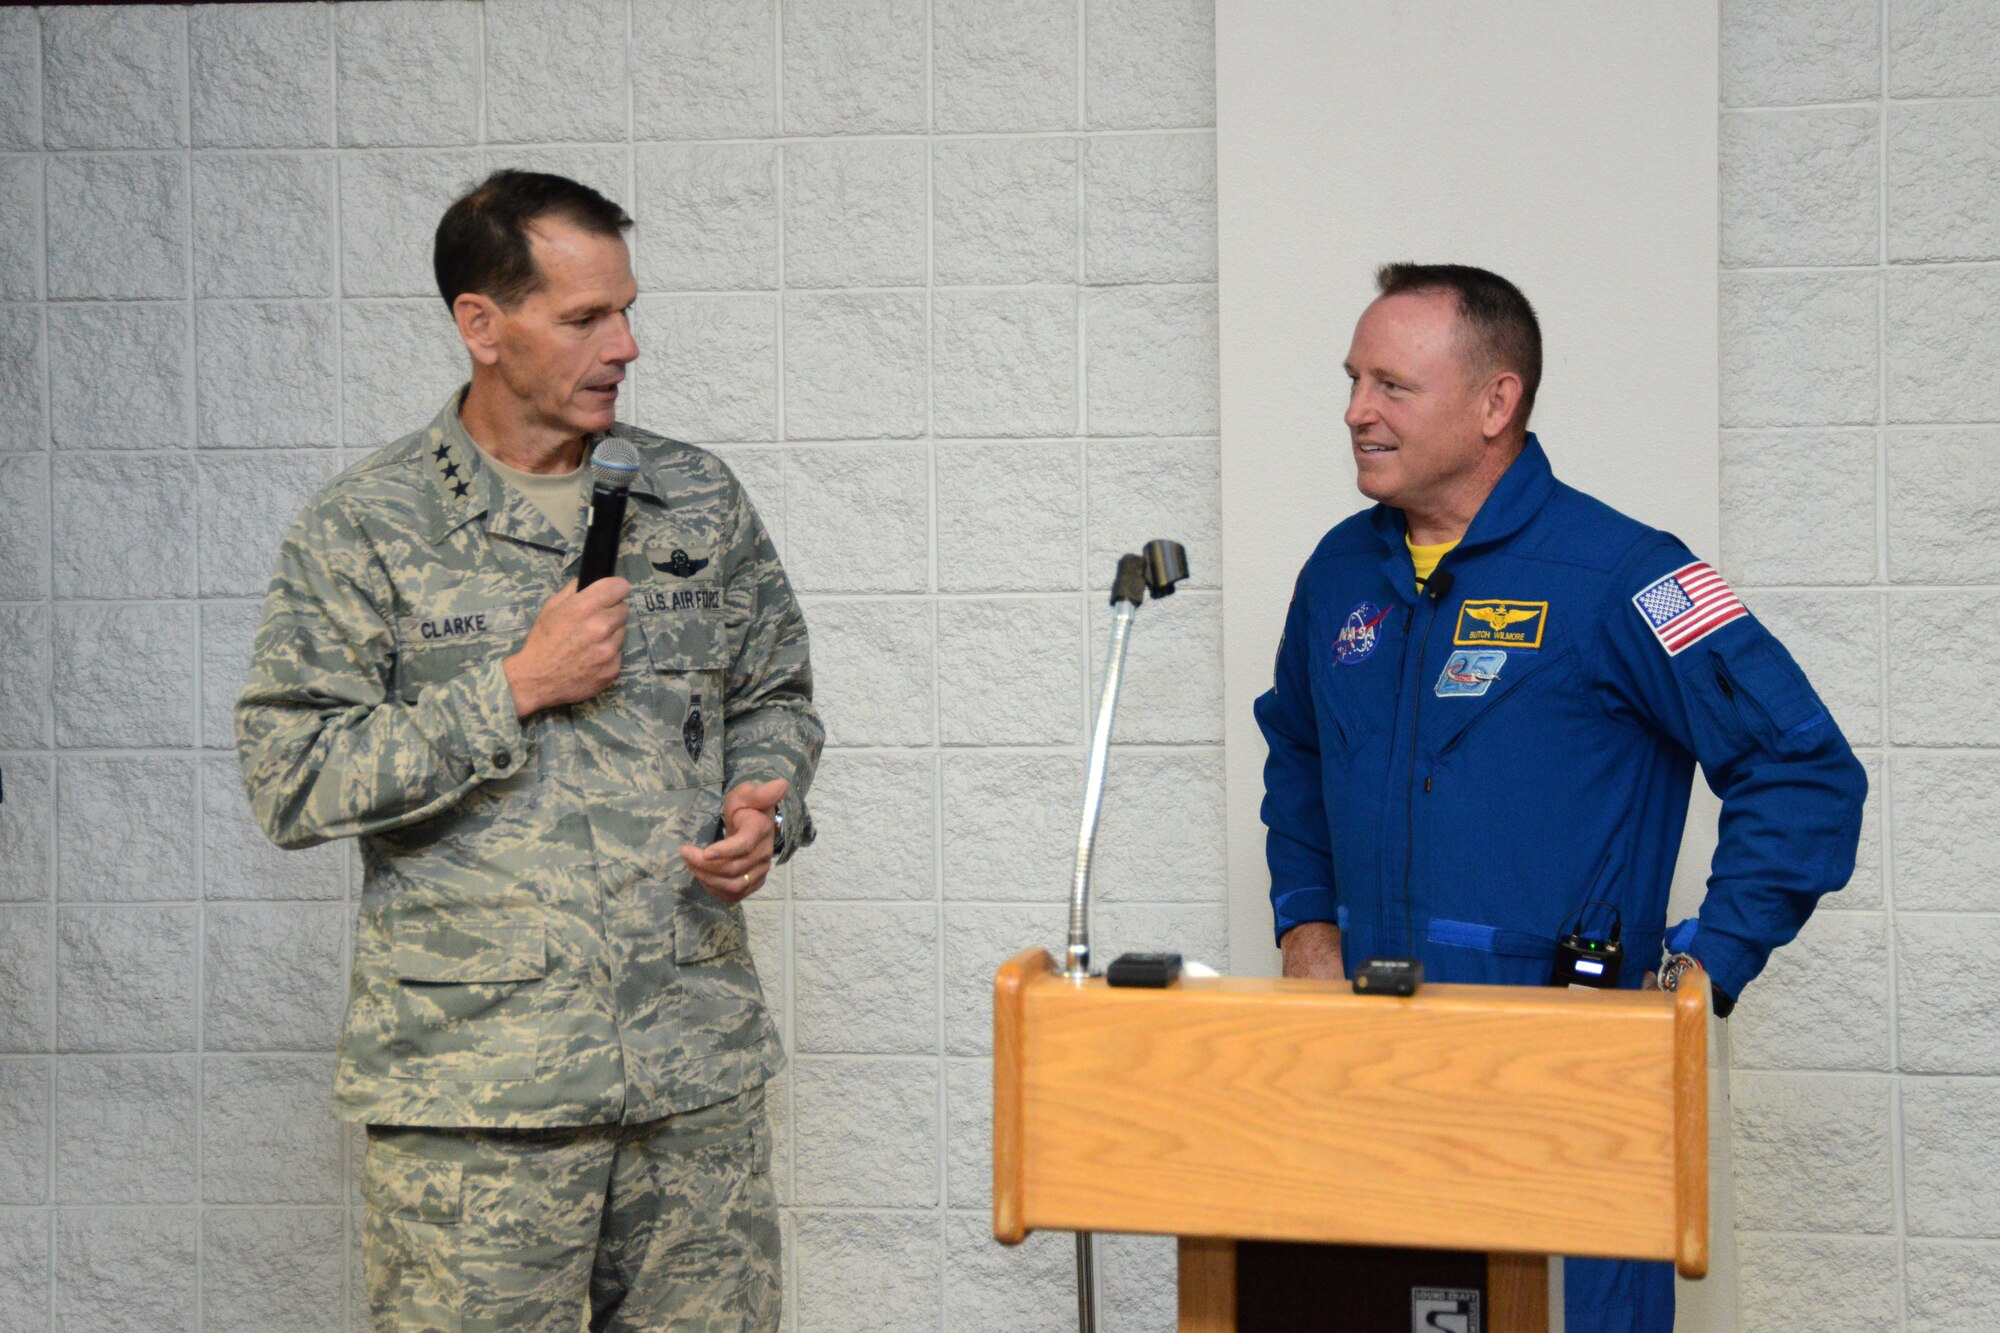 Director of the Air National Guard Lt. Gen. Stanley E. Clarke III, talks with NASA astronaut and US Navy Capt. Barry E. Wilmore about his experiences as commander of the International Space Station at the 2015 Air National Guard Executive Safety Summit at Volk Field Combat Readiness Training Center, Wisconsin, May 5, 2015. The conference covers a wide range of topics for ANG senior leaders including safety, resilience, mishap prevention and training. (US Air National Guard photo by Staff Sgt. John E. Hillier/RELEASED)